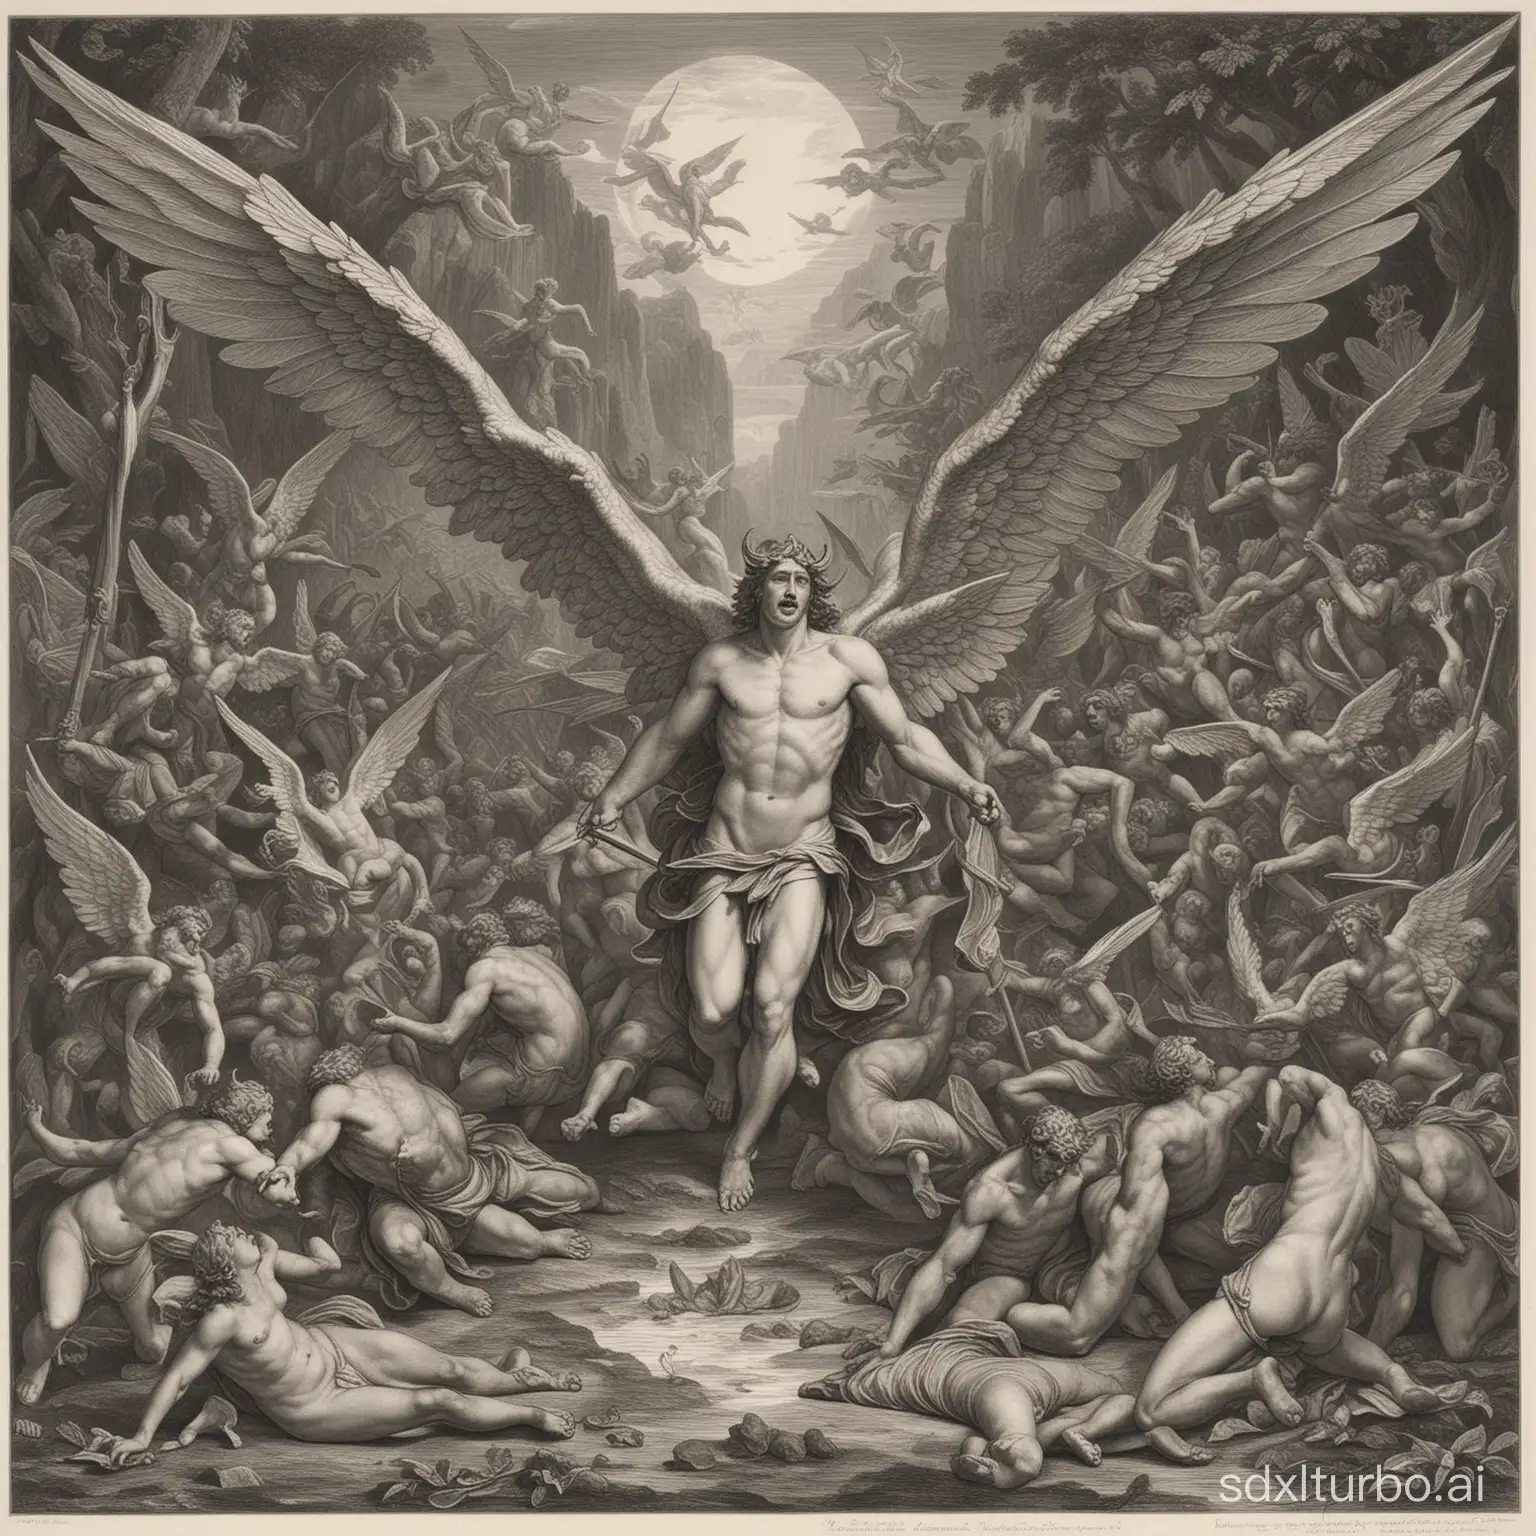 Generate a pencil drawing or engraving about paradise lost. The drawing should contain the motif of the angels fighting against Lucifer's army, or Lucifer's despair after losing.